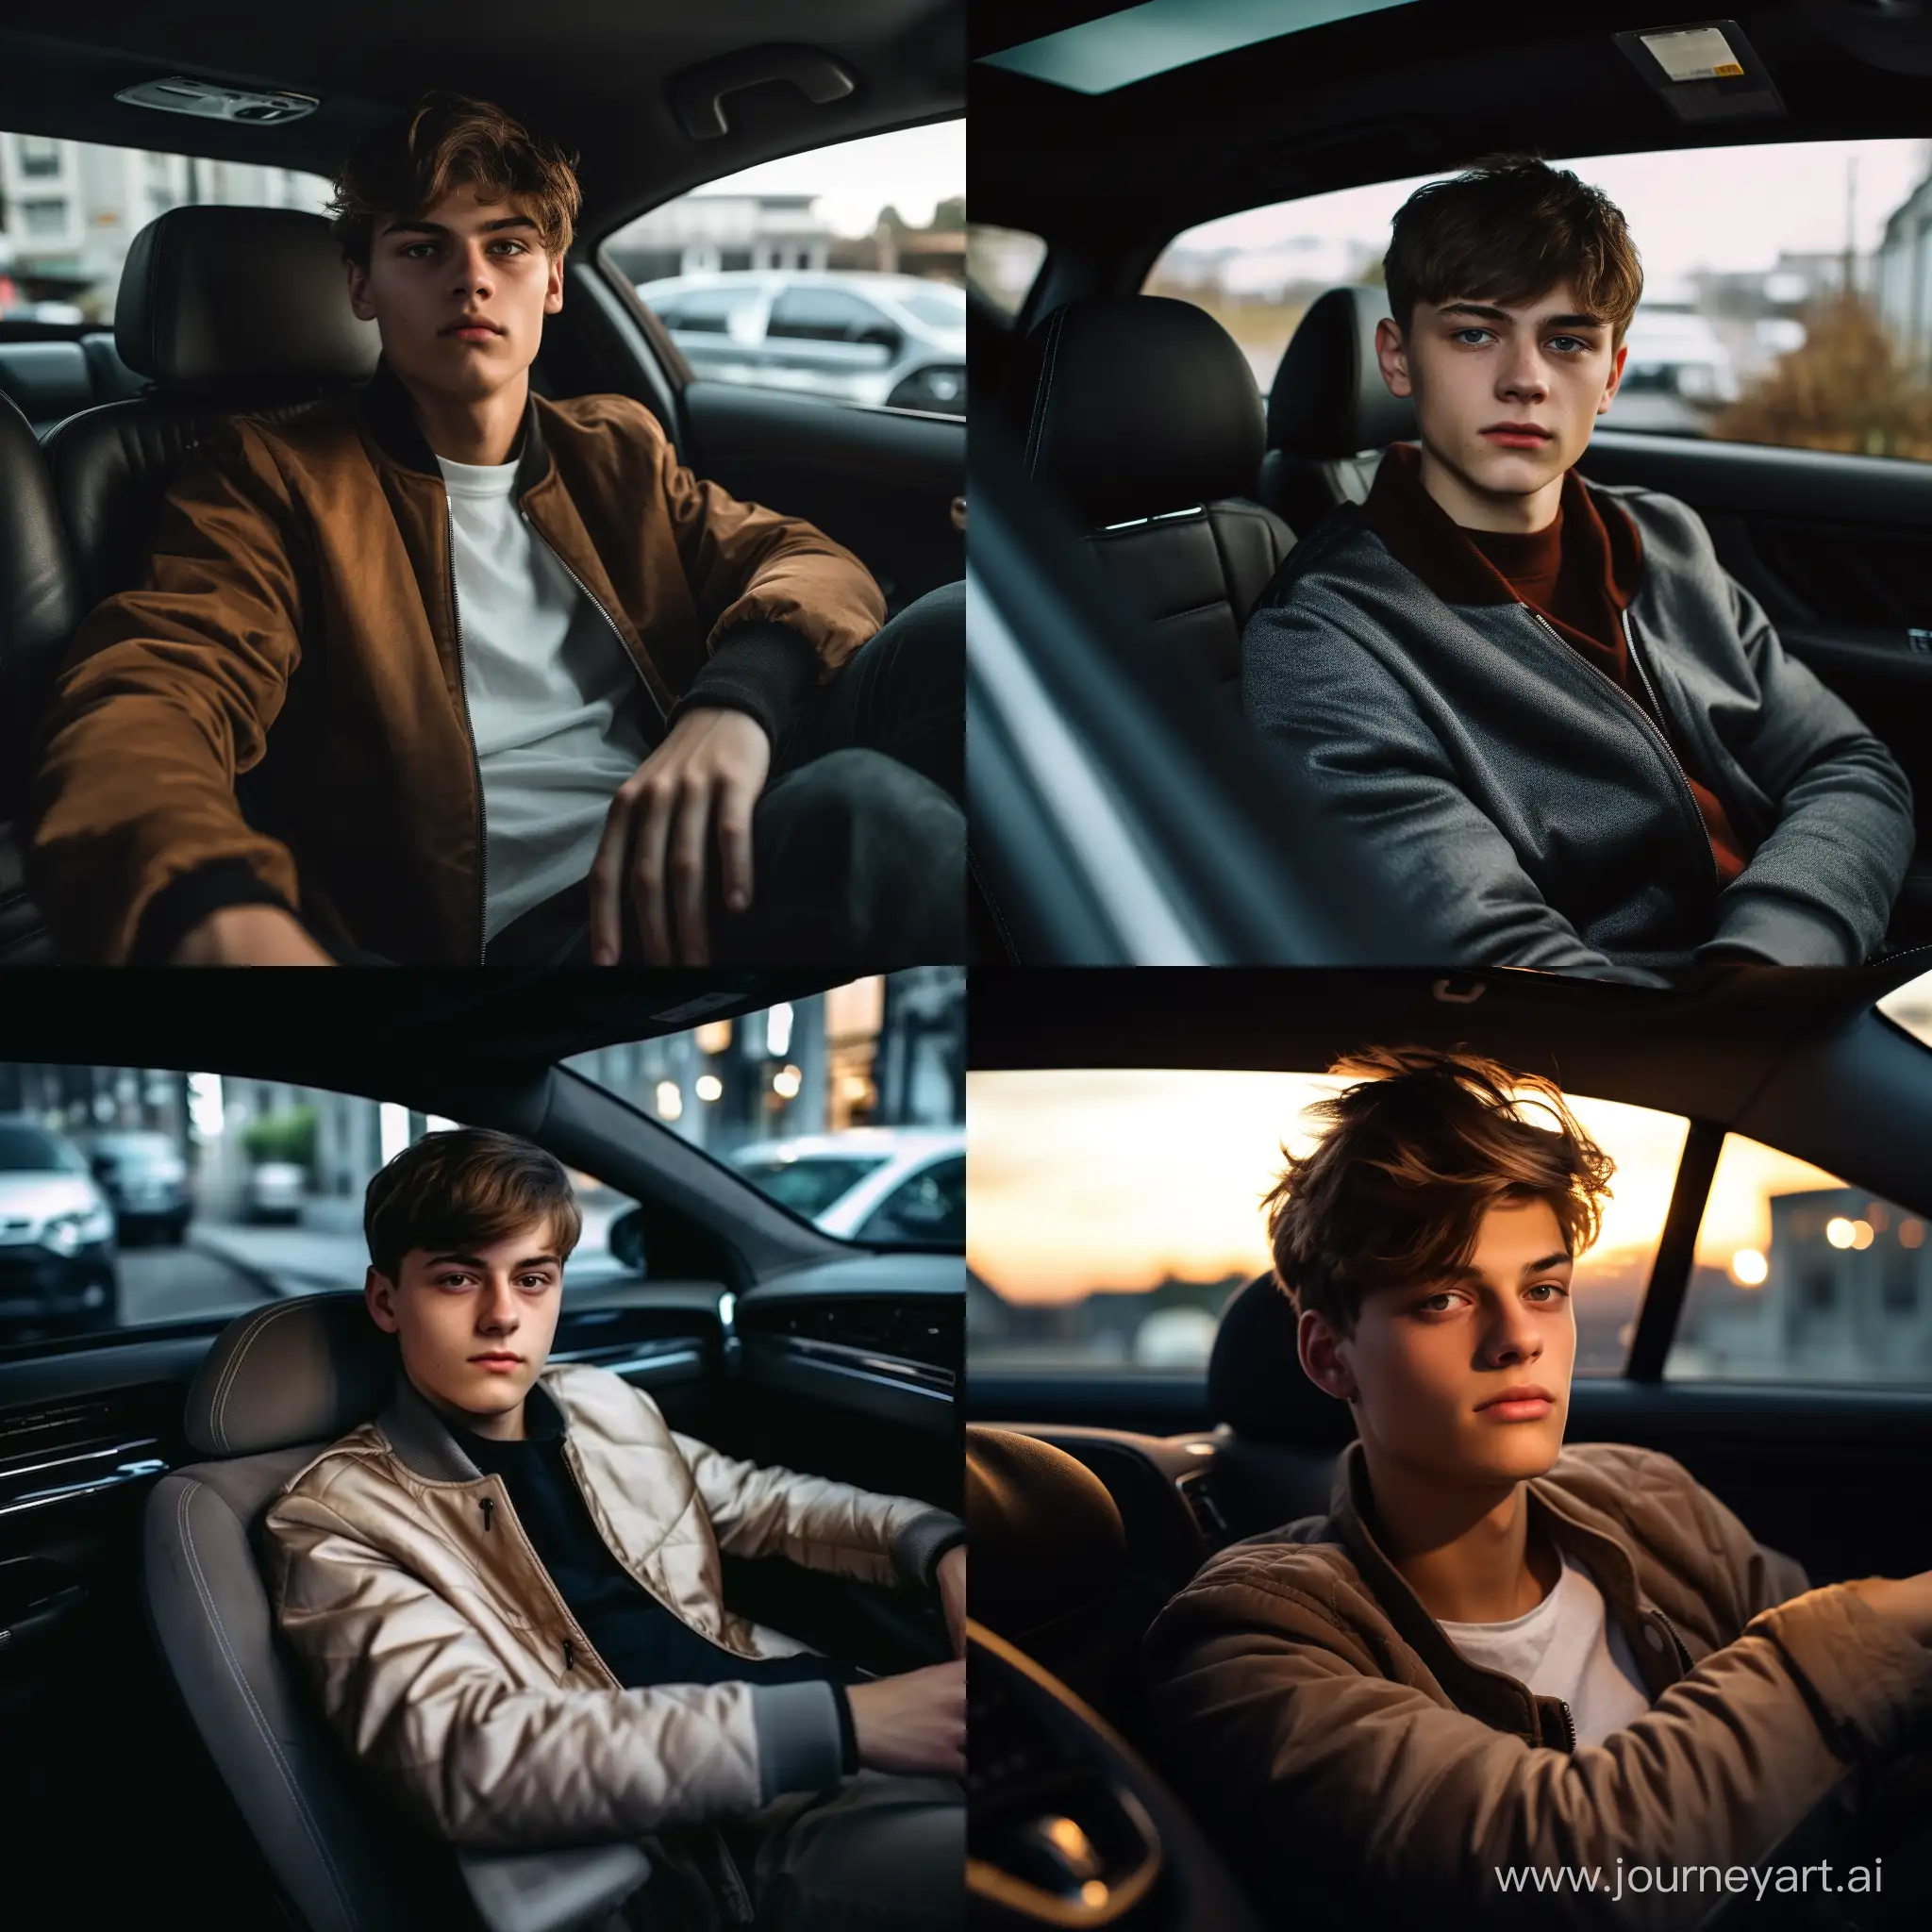 A sophisticated, realistic 4k cinematic photo, teenager, Not a mature 16 years old. European appearance with classical darkbrown medium length Fringe haircut. He's wearing brand-new casual clothes. He is sitting in back seat of Mercedes maybach car, long exposure, close-up portrait In the style of 35mm film